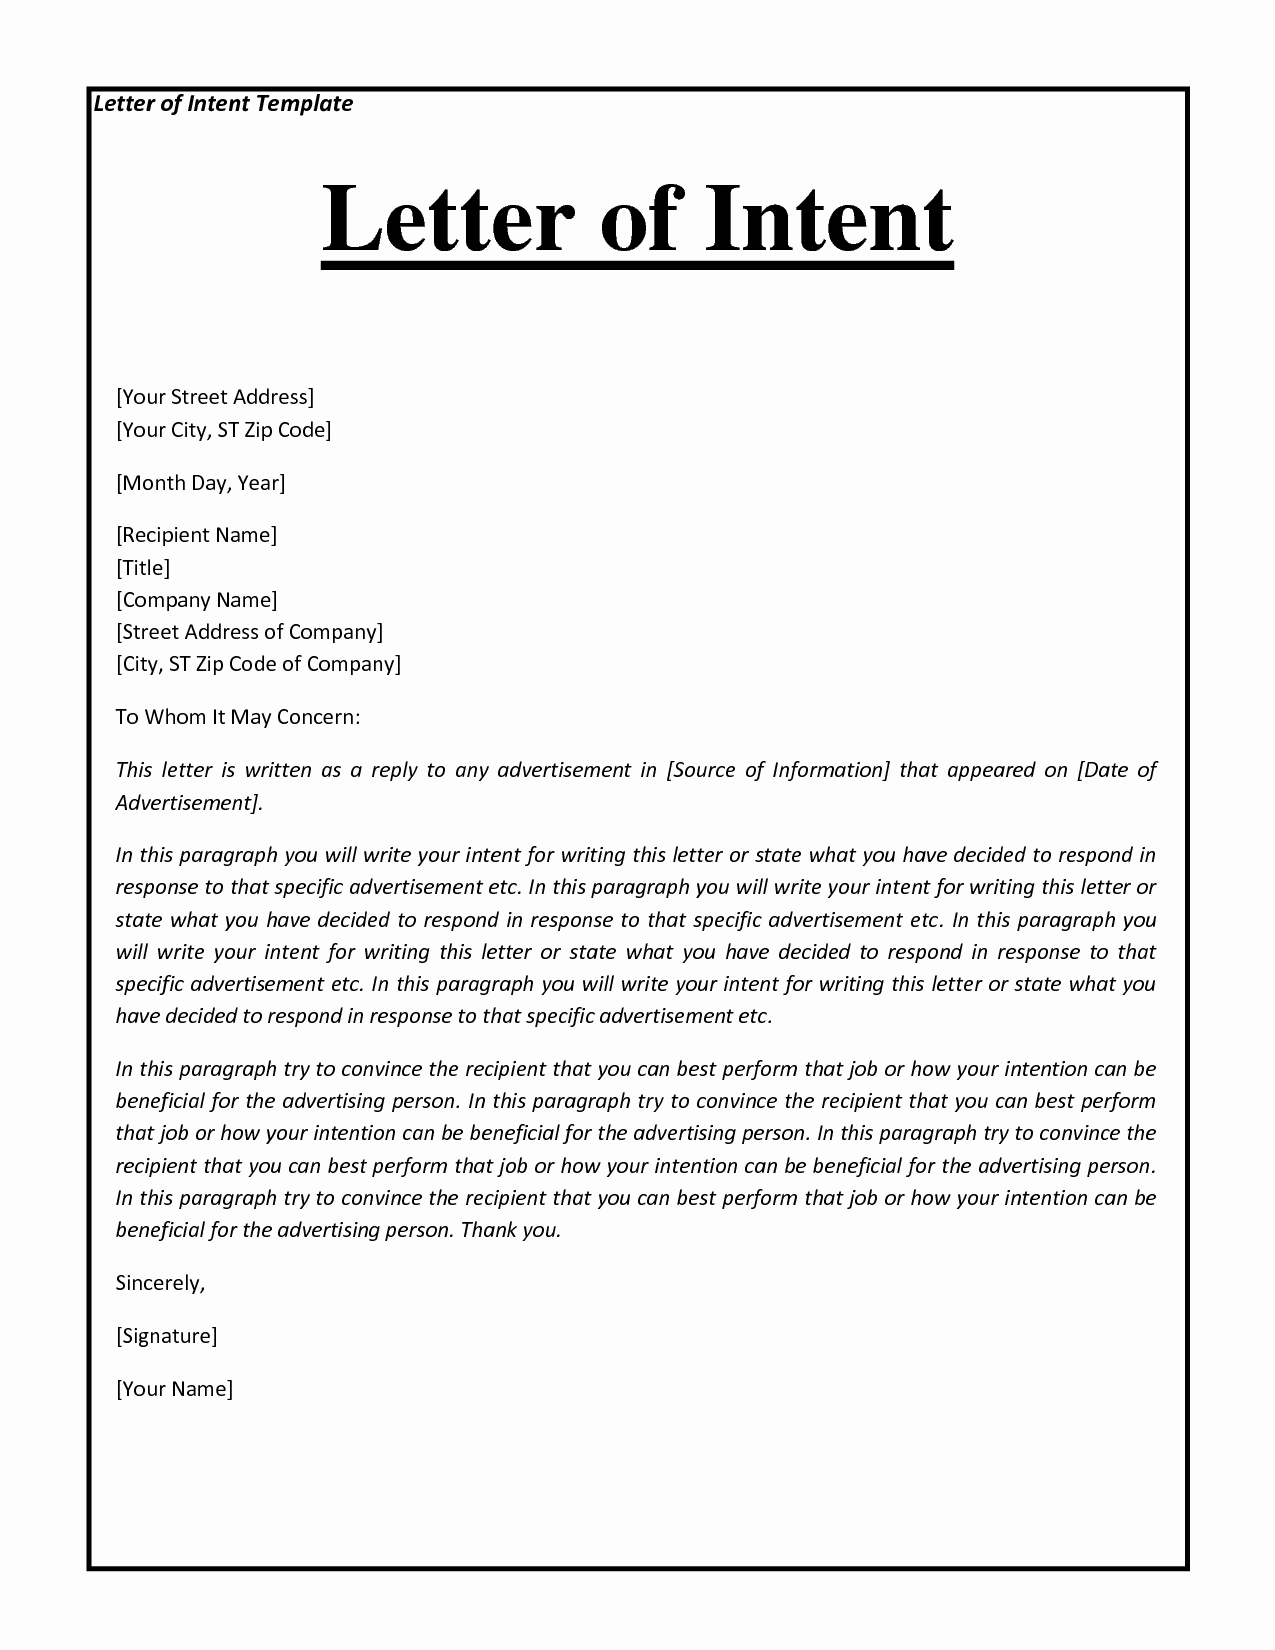 Letter Of Intent Sample Job Inspirational How to Write A Letter Of Intent for A Job Application